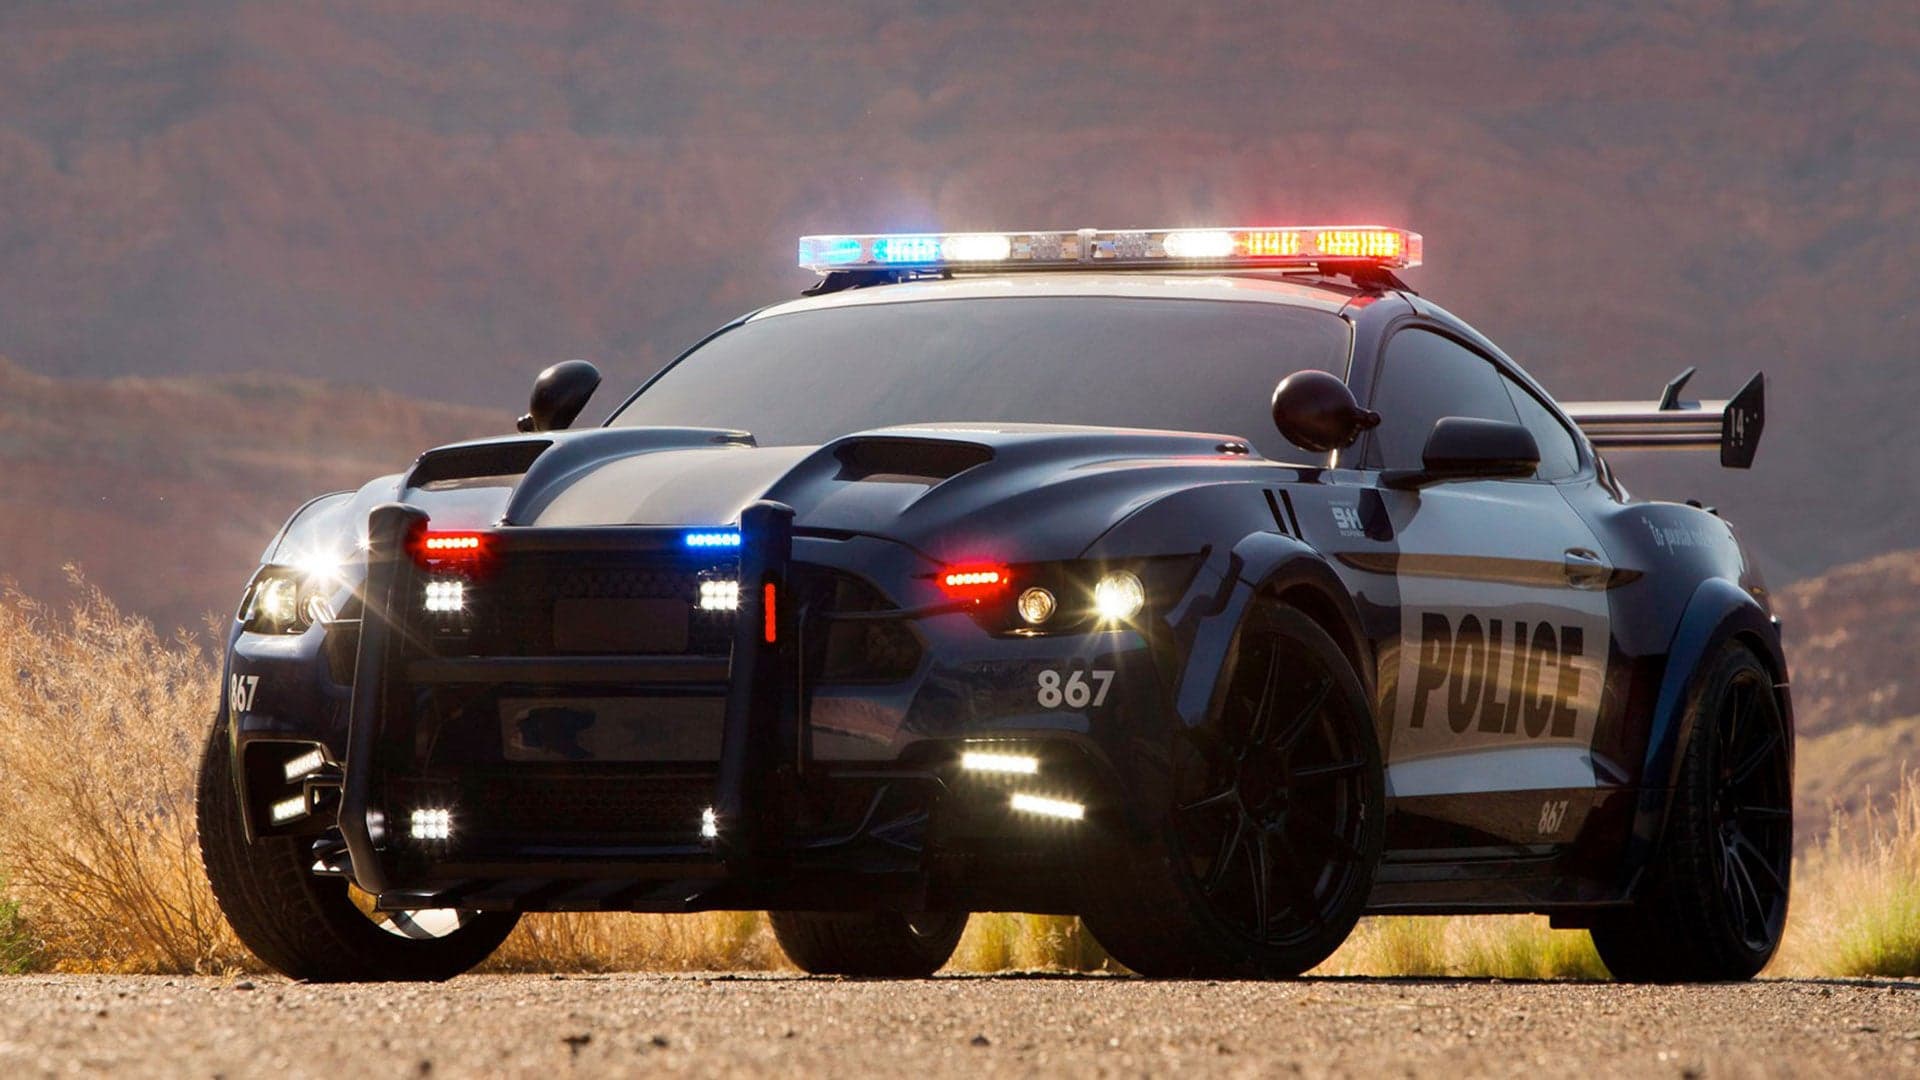 This Ford Mustang Police Cruiser Is the Latest Transformers Muscle Car